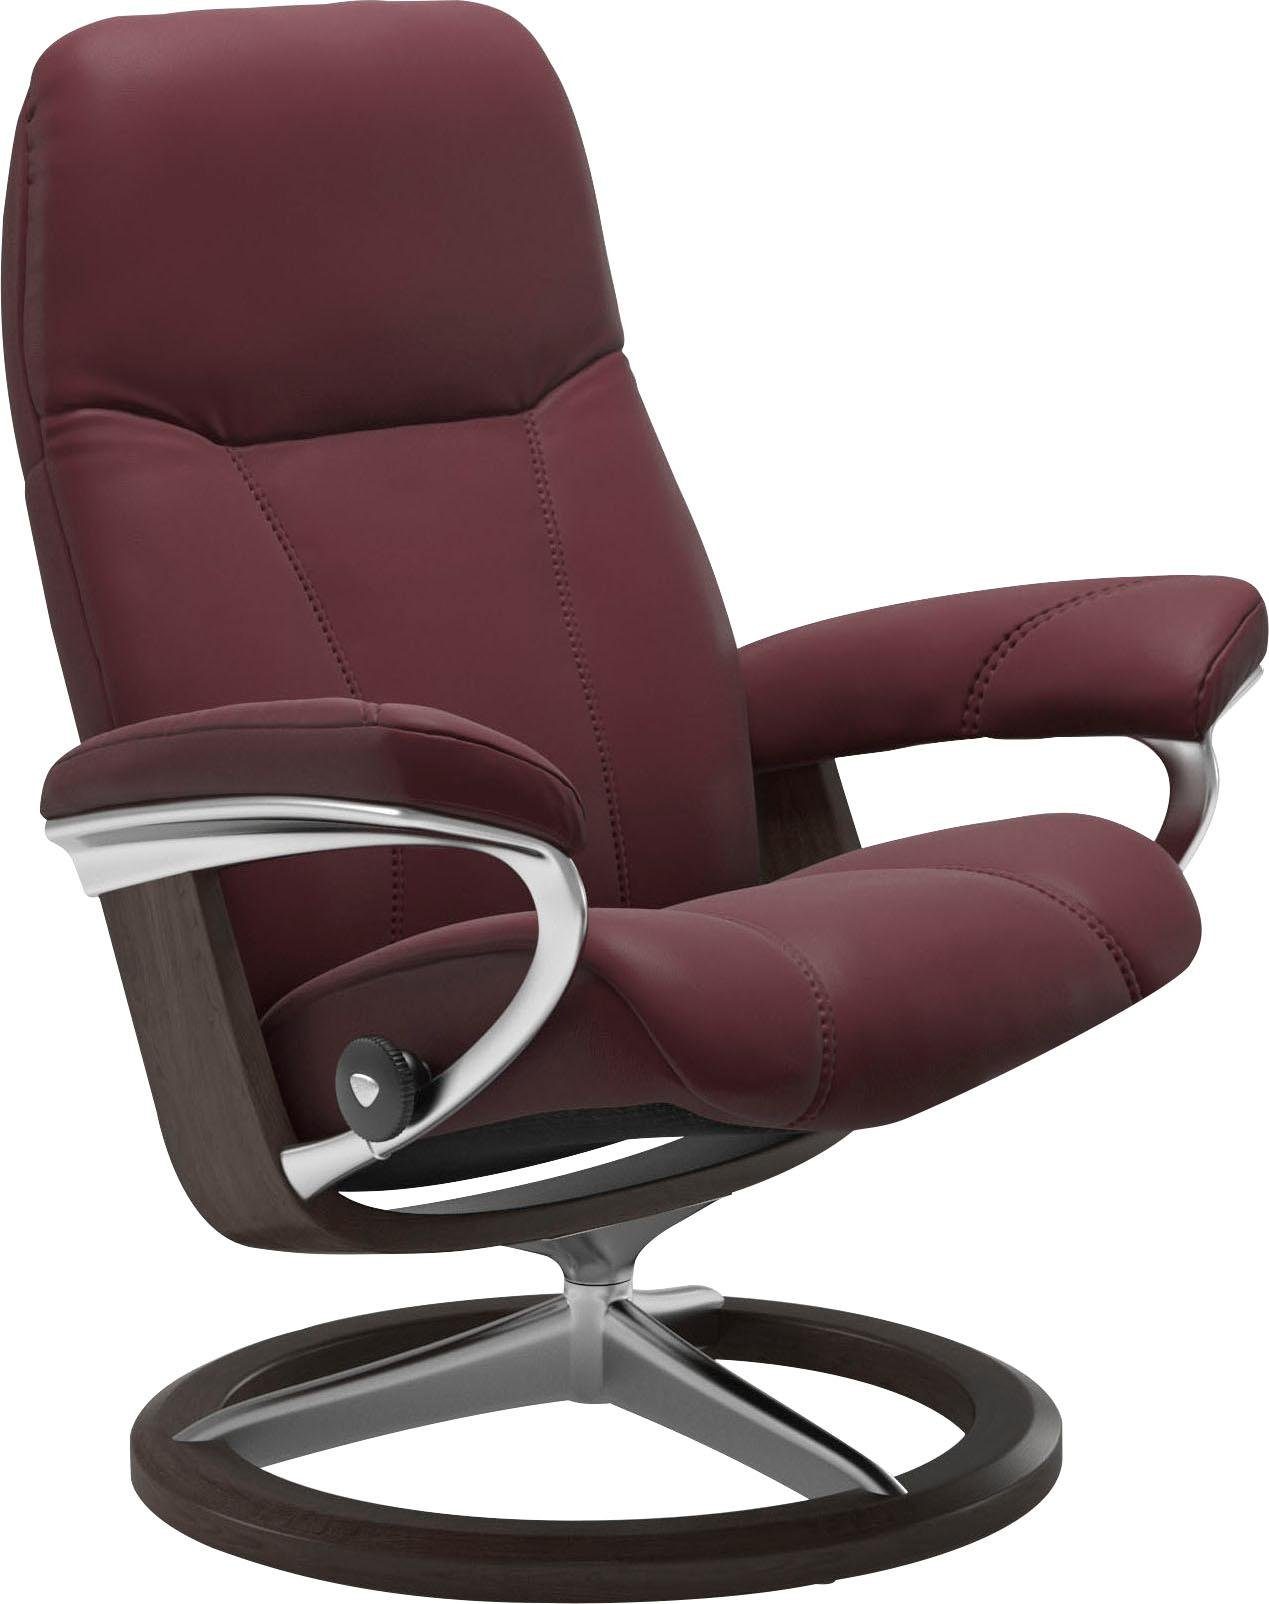 Größe Gestell Consul, mit Wenge Relaxsessel Signature Stressless® Base, S,